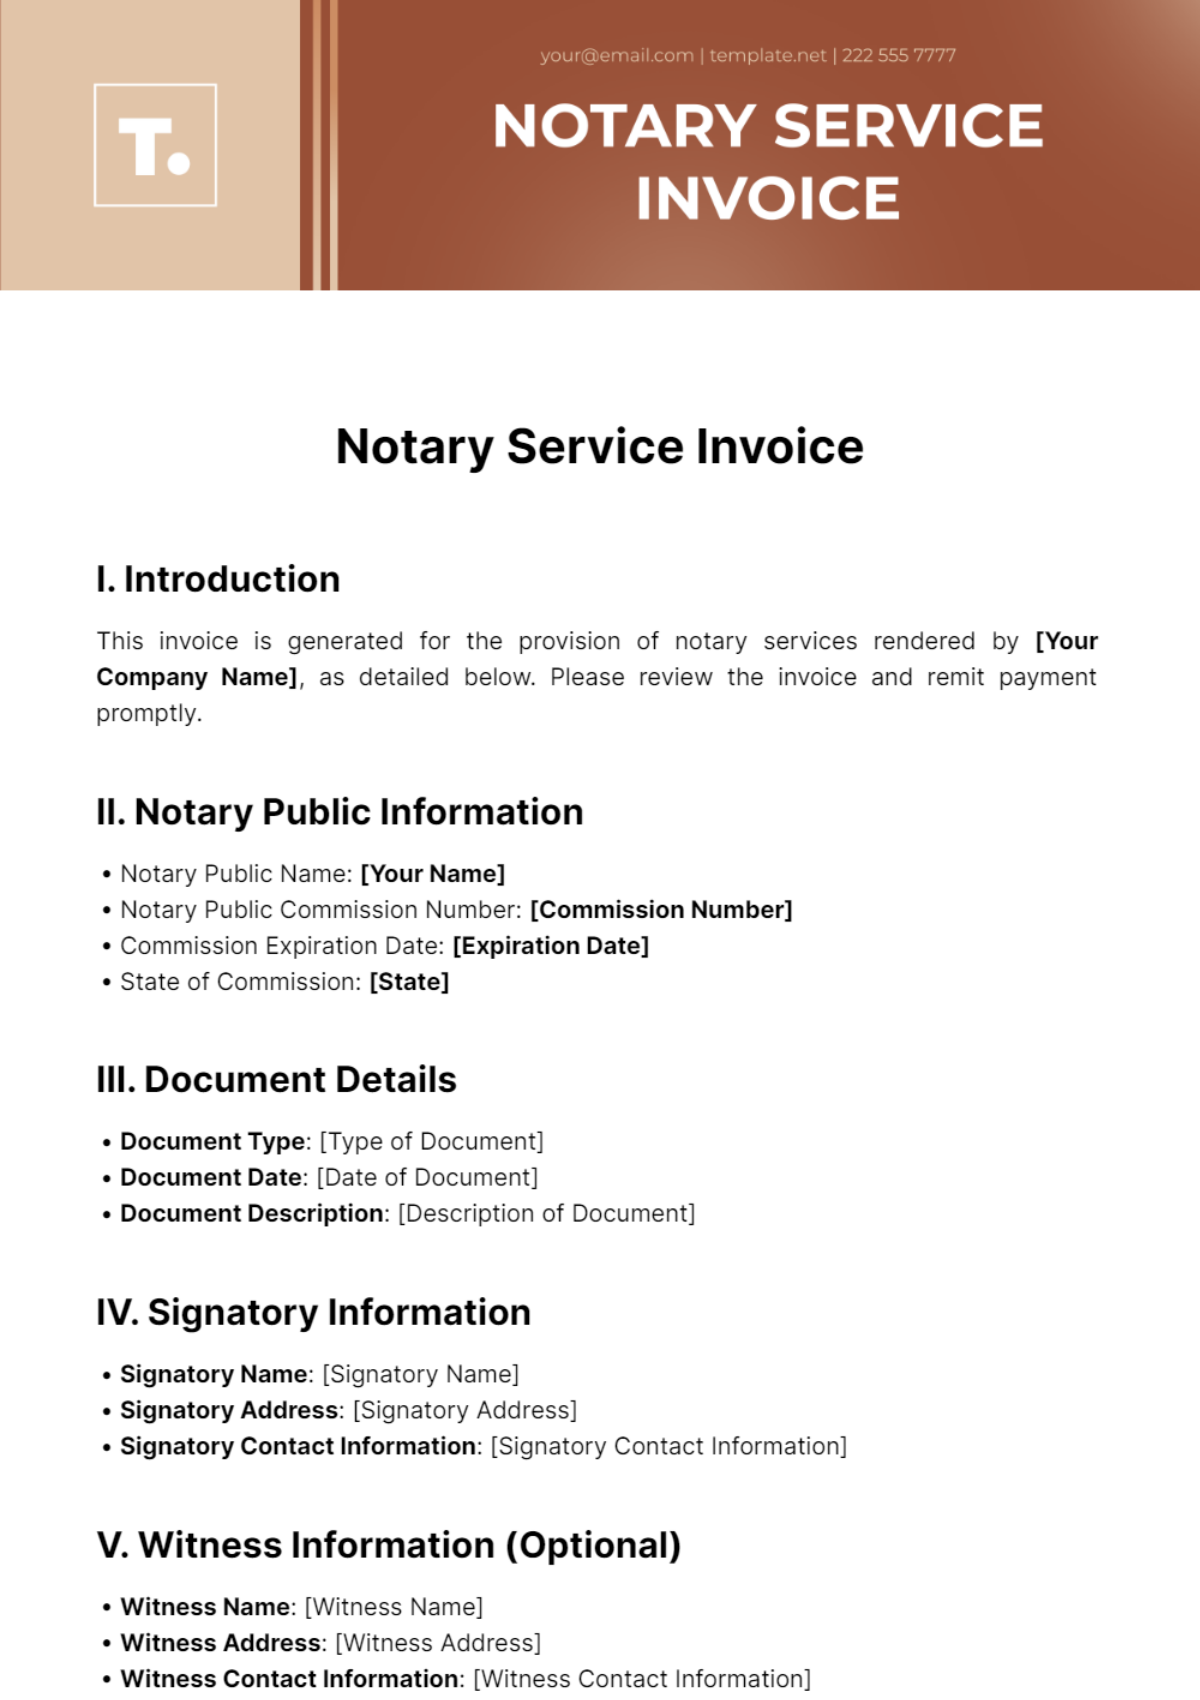 Notary Service Invoice Template